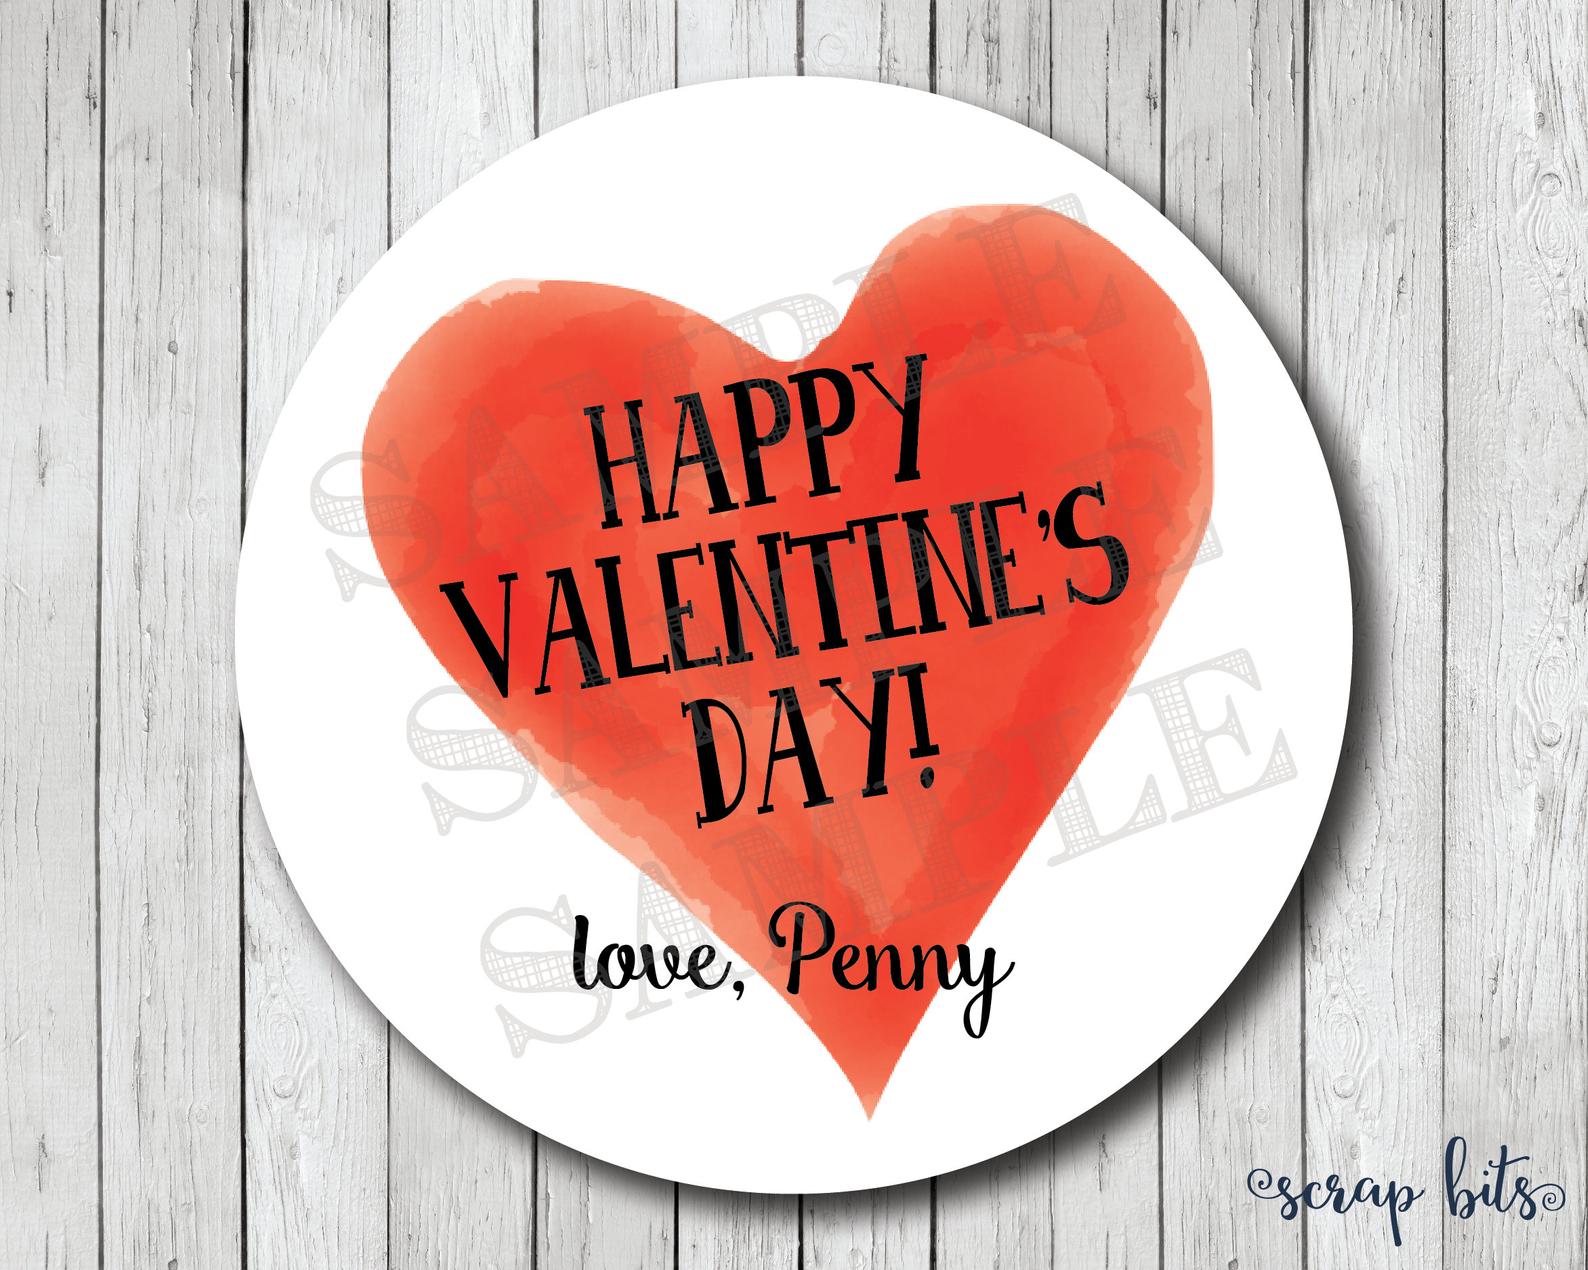 Watercolor Red Heart Valentines . Valentine's Day Stickers or Tags - Scrap Bits